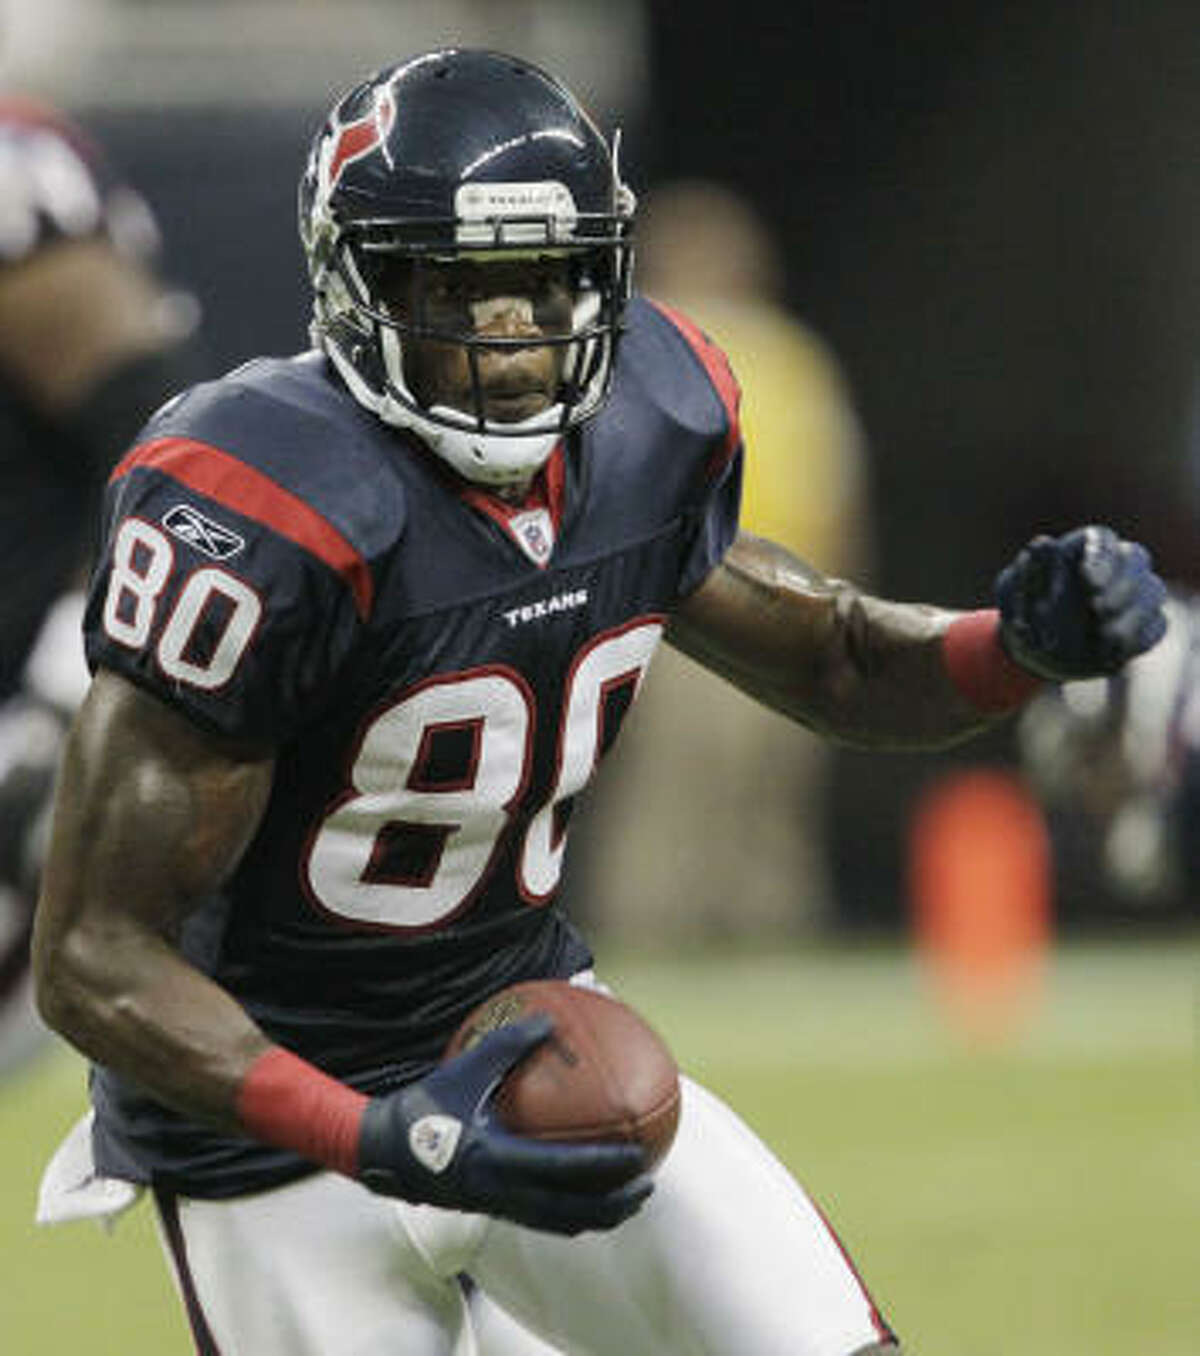 2. Miami (22) Group includes: Andre Johnson, WR, Texans